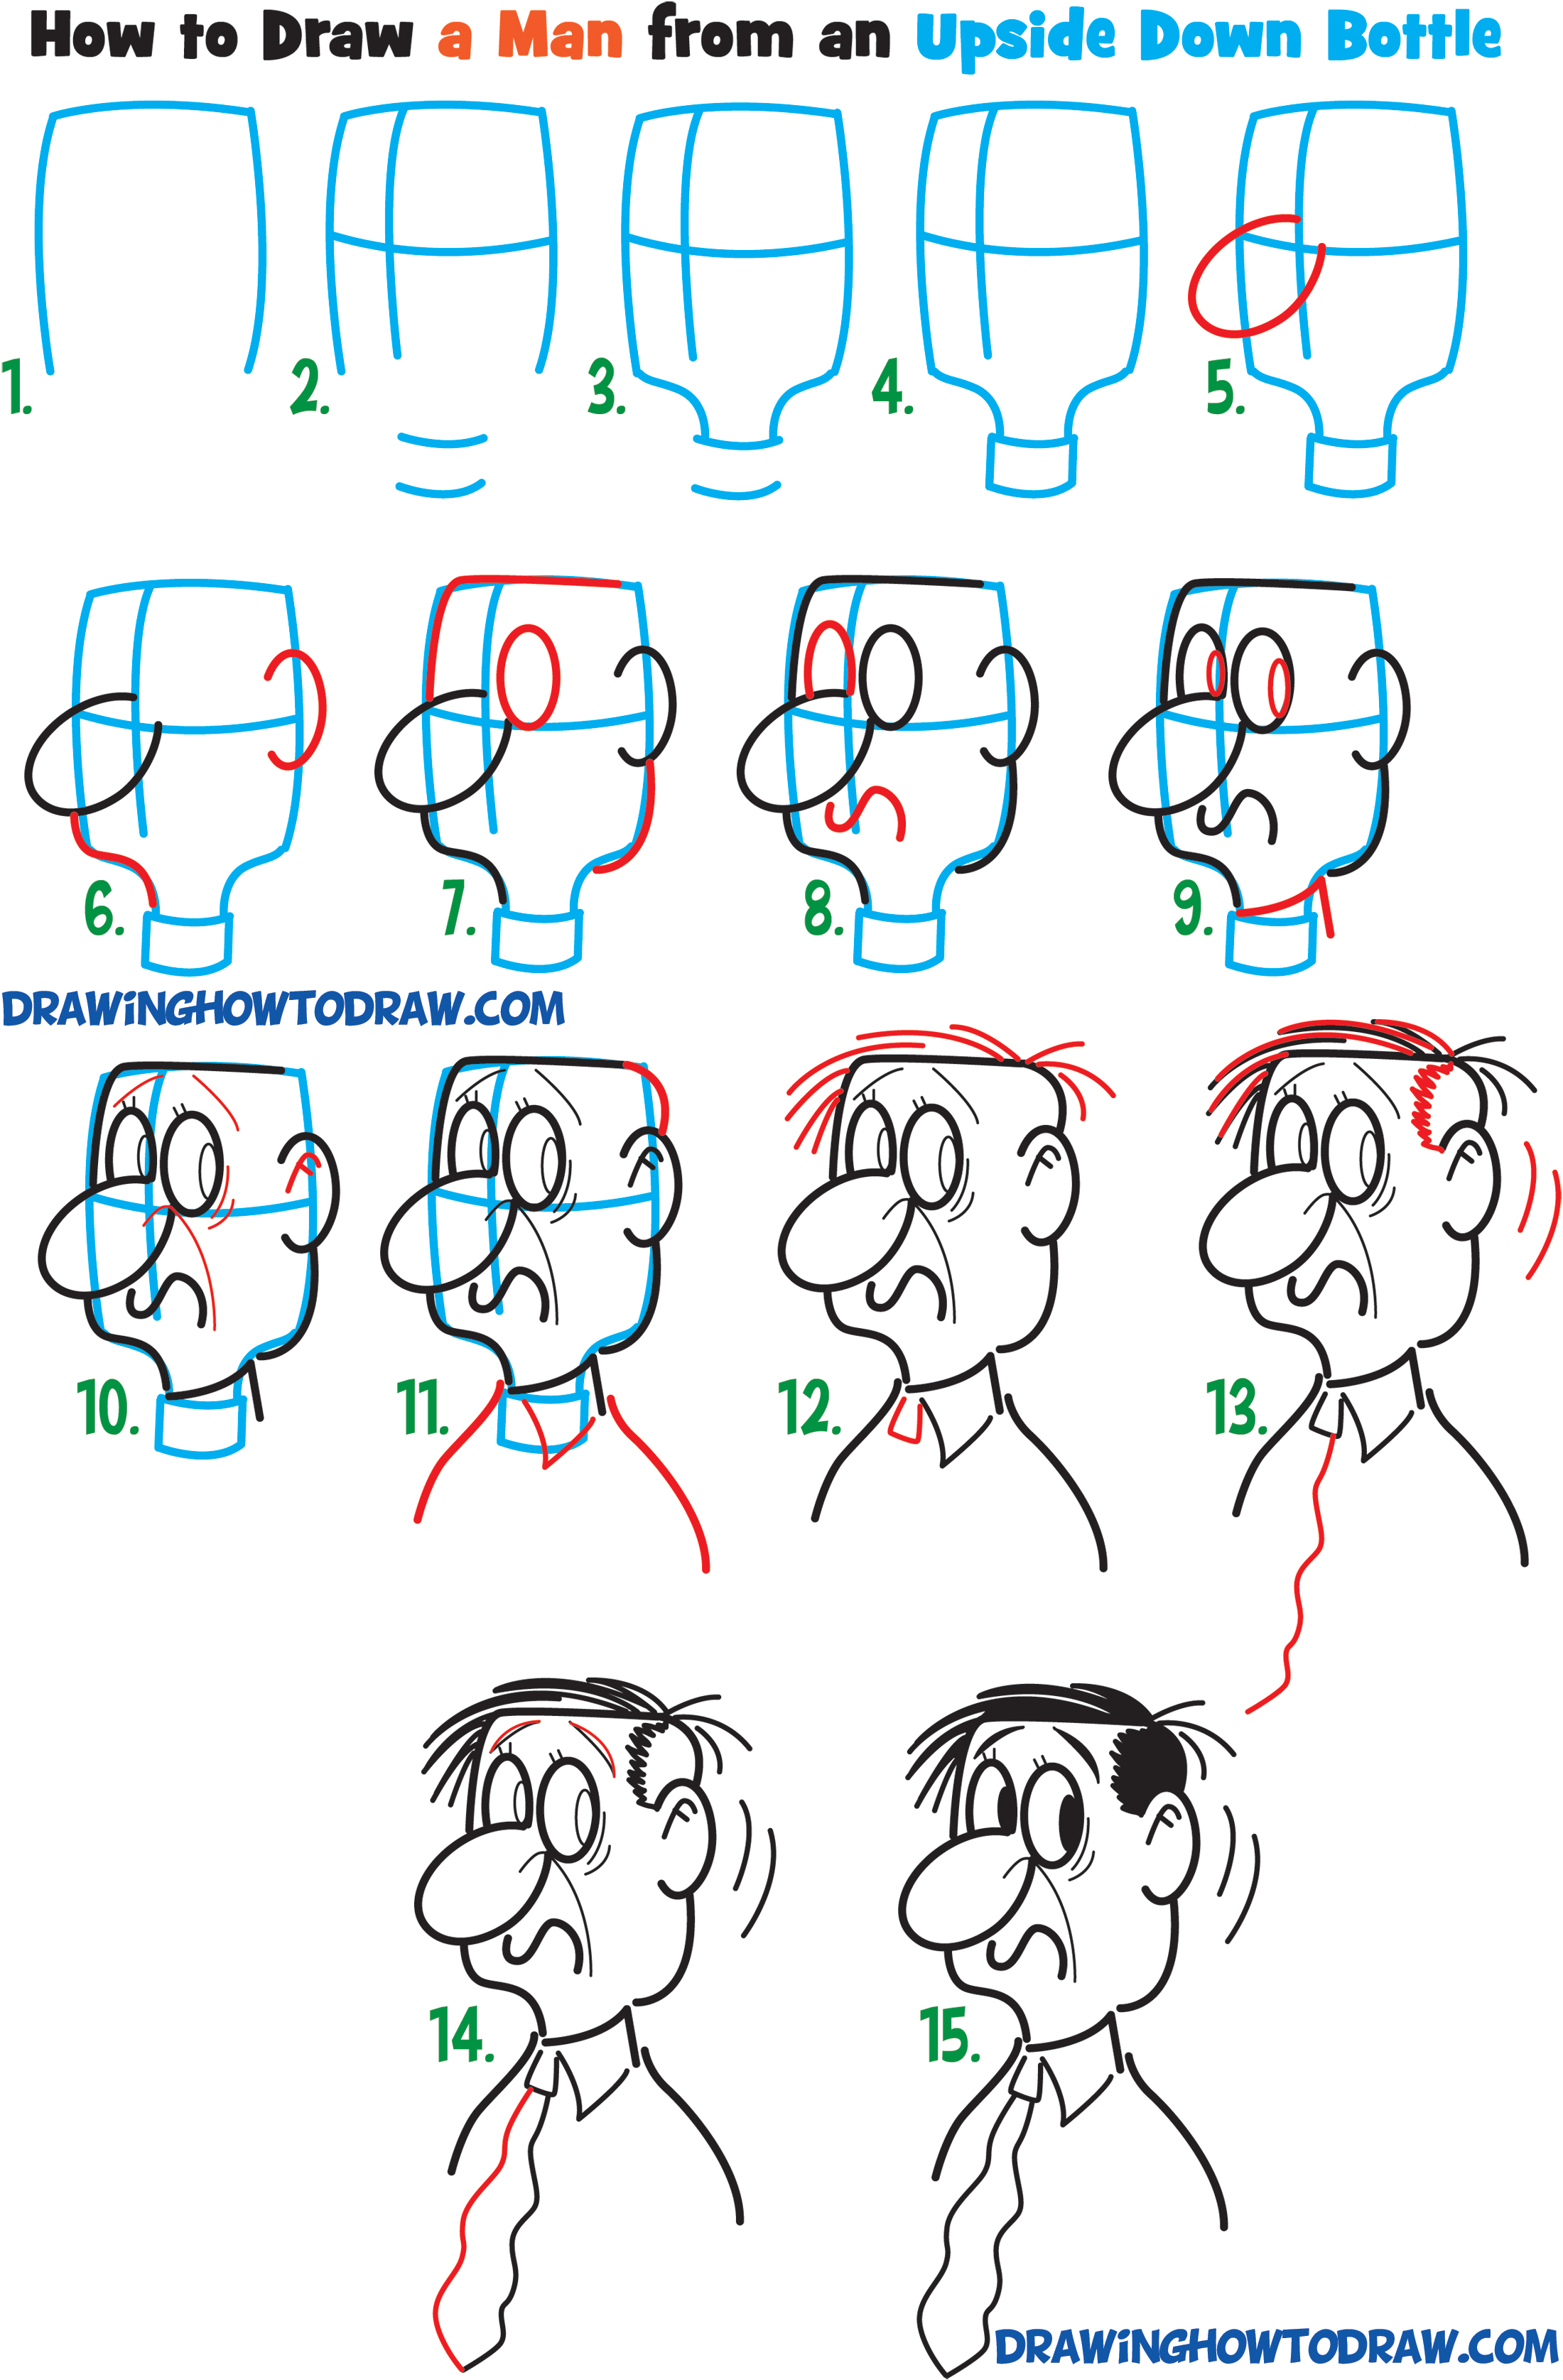 Learn How to Draw Cartoon Men Character39s Faces from